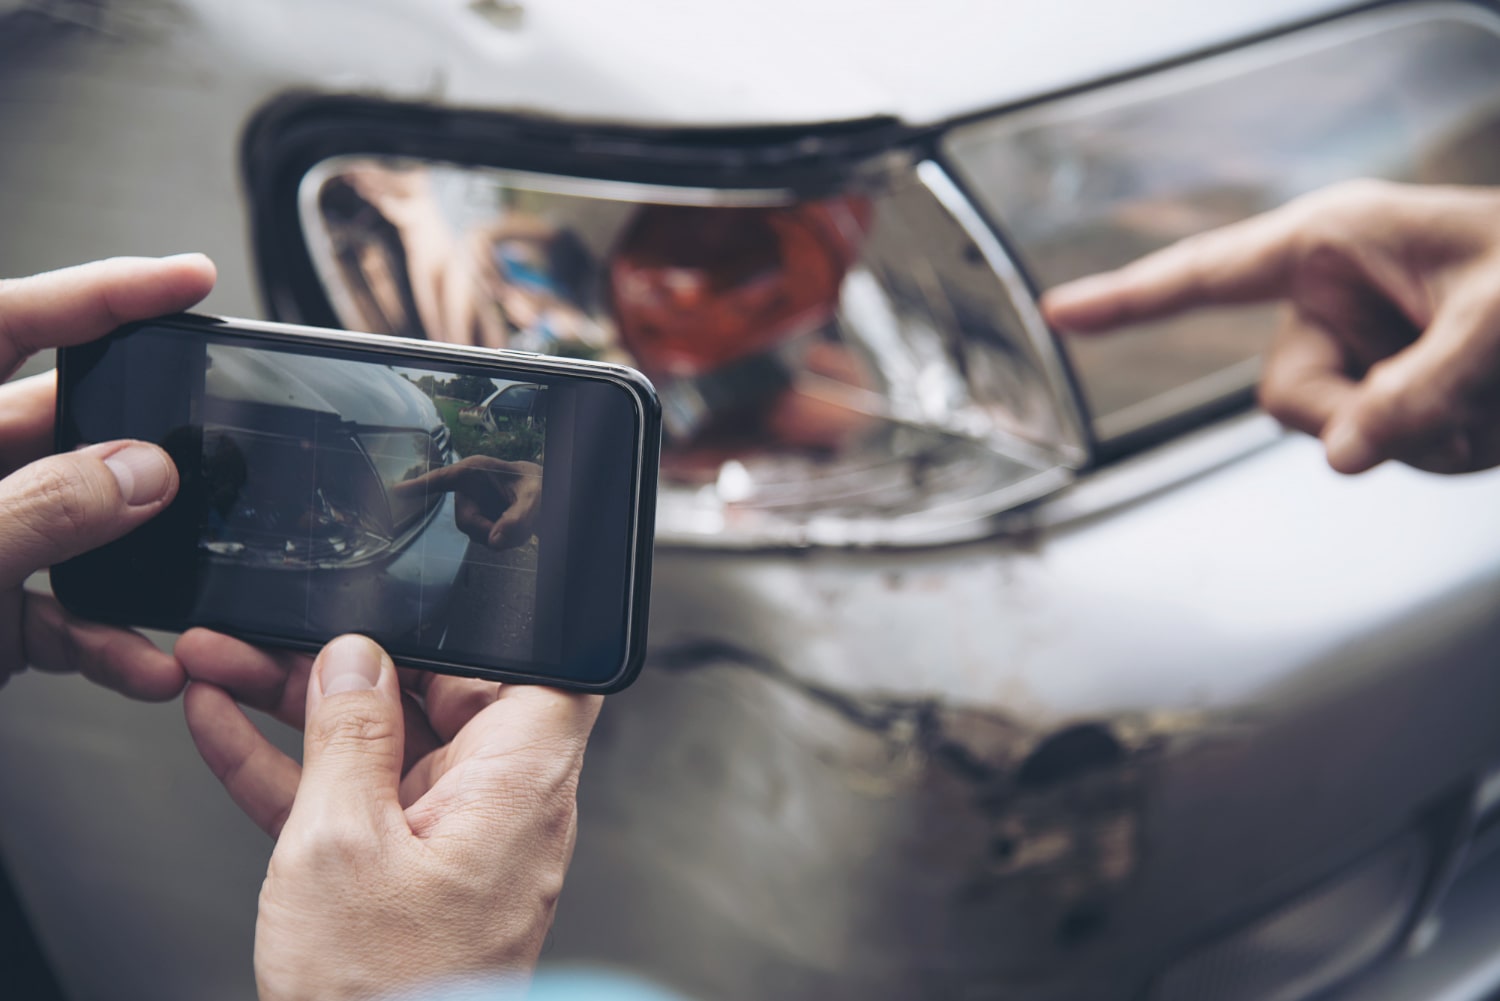 Person photographing car taillight damage with a smartphone for insurance claim evidence